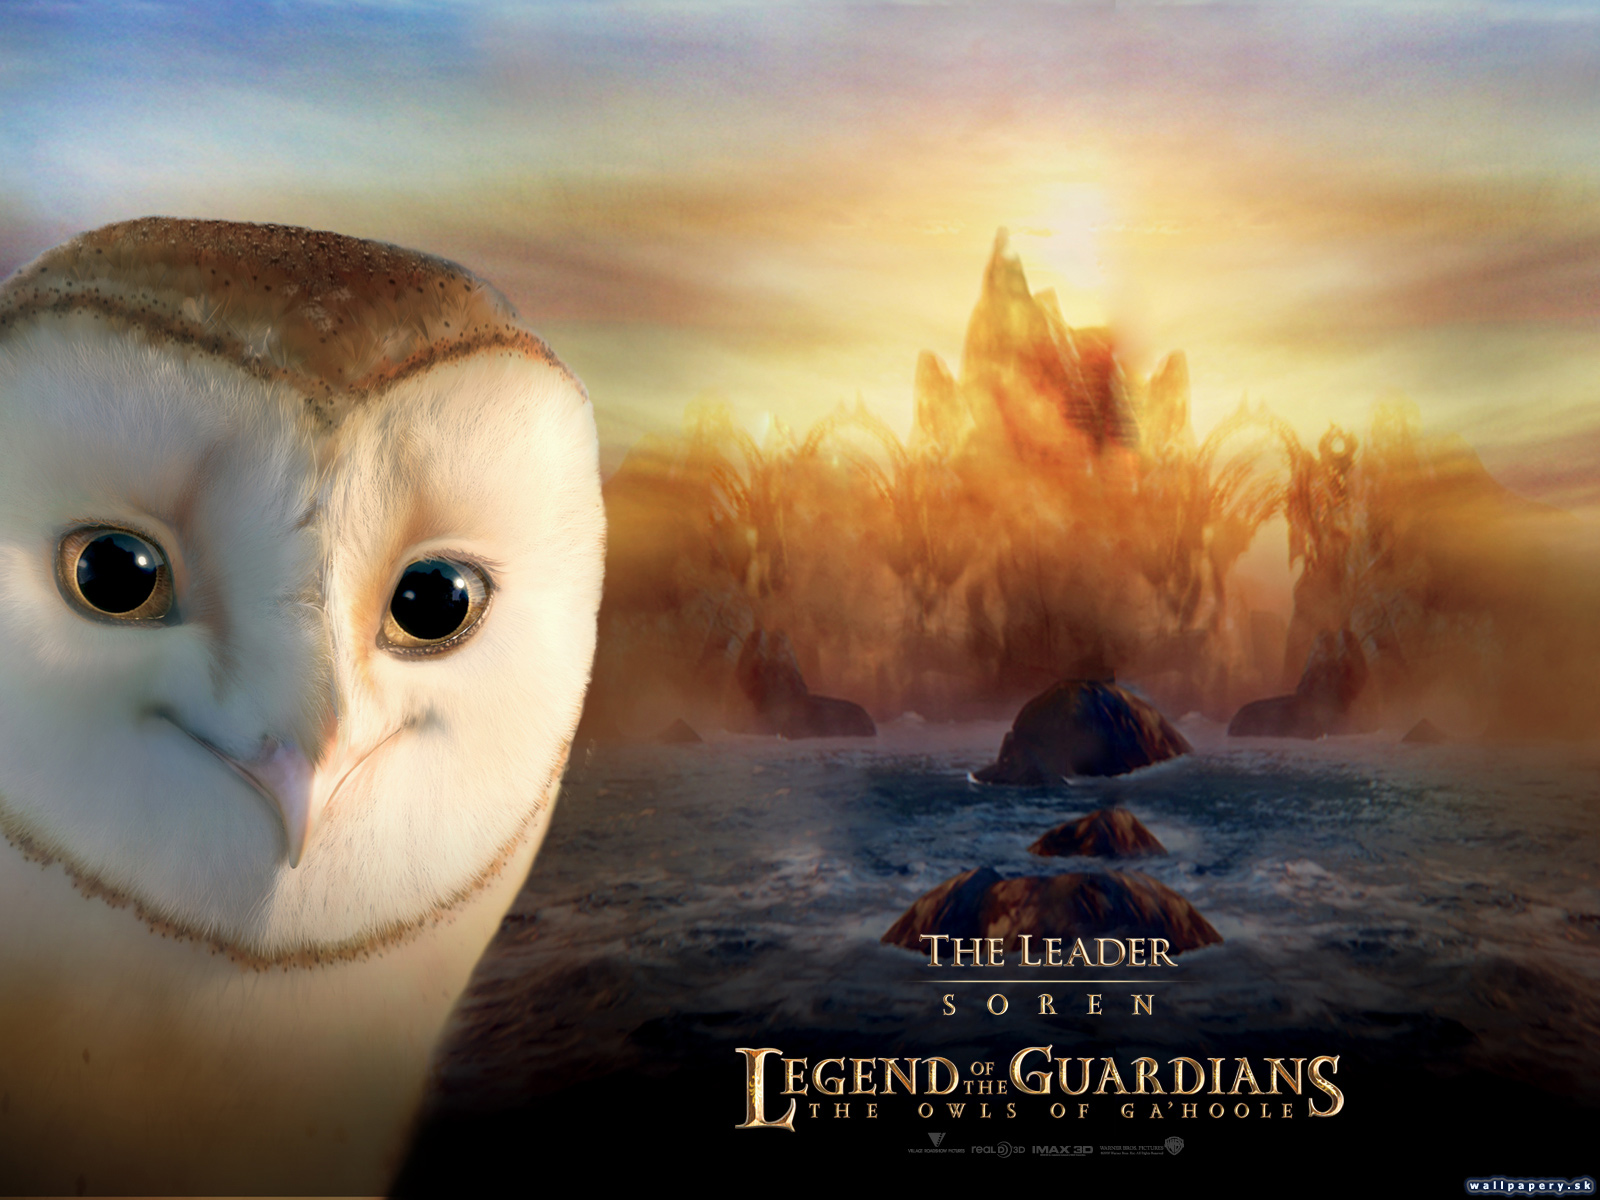 Legend of the Guardians: The Owls of Ga'Hoole - wallpaper 9